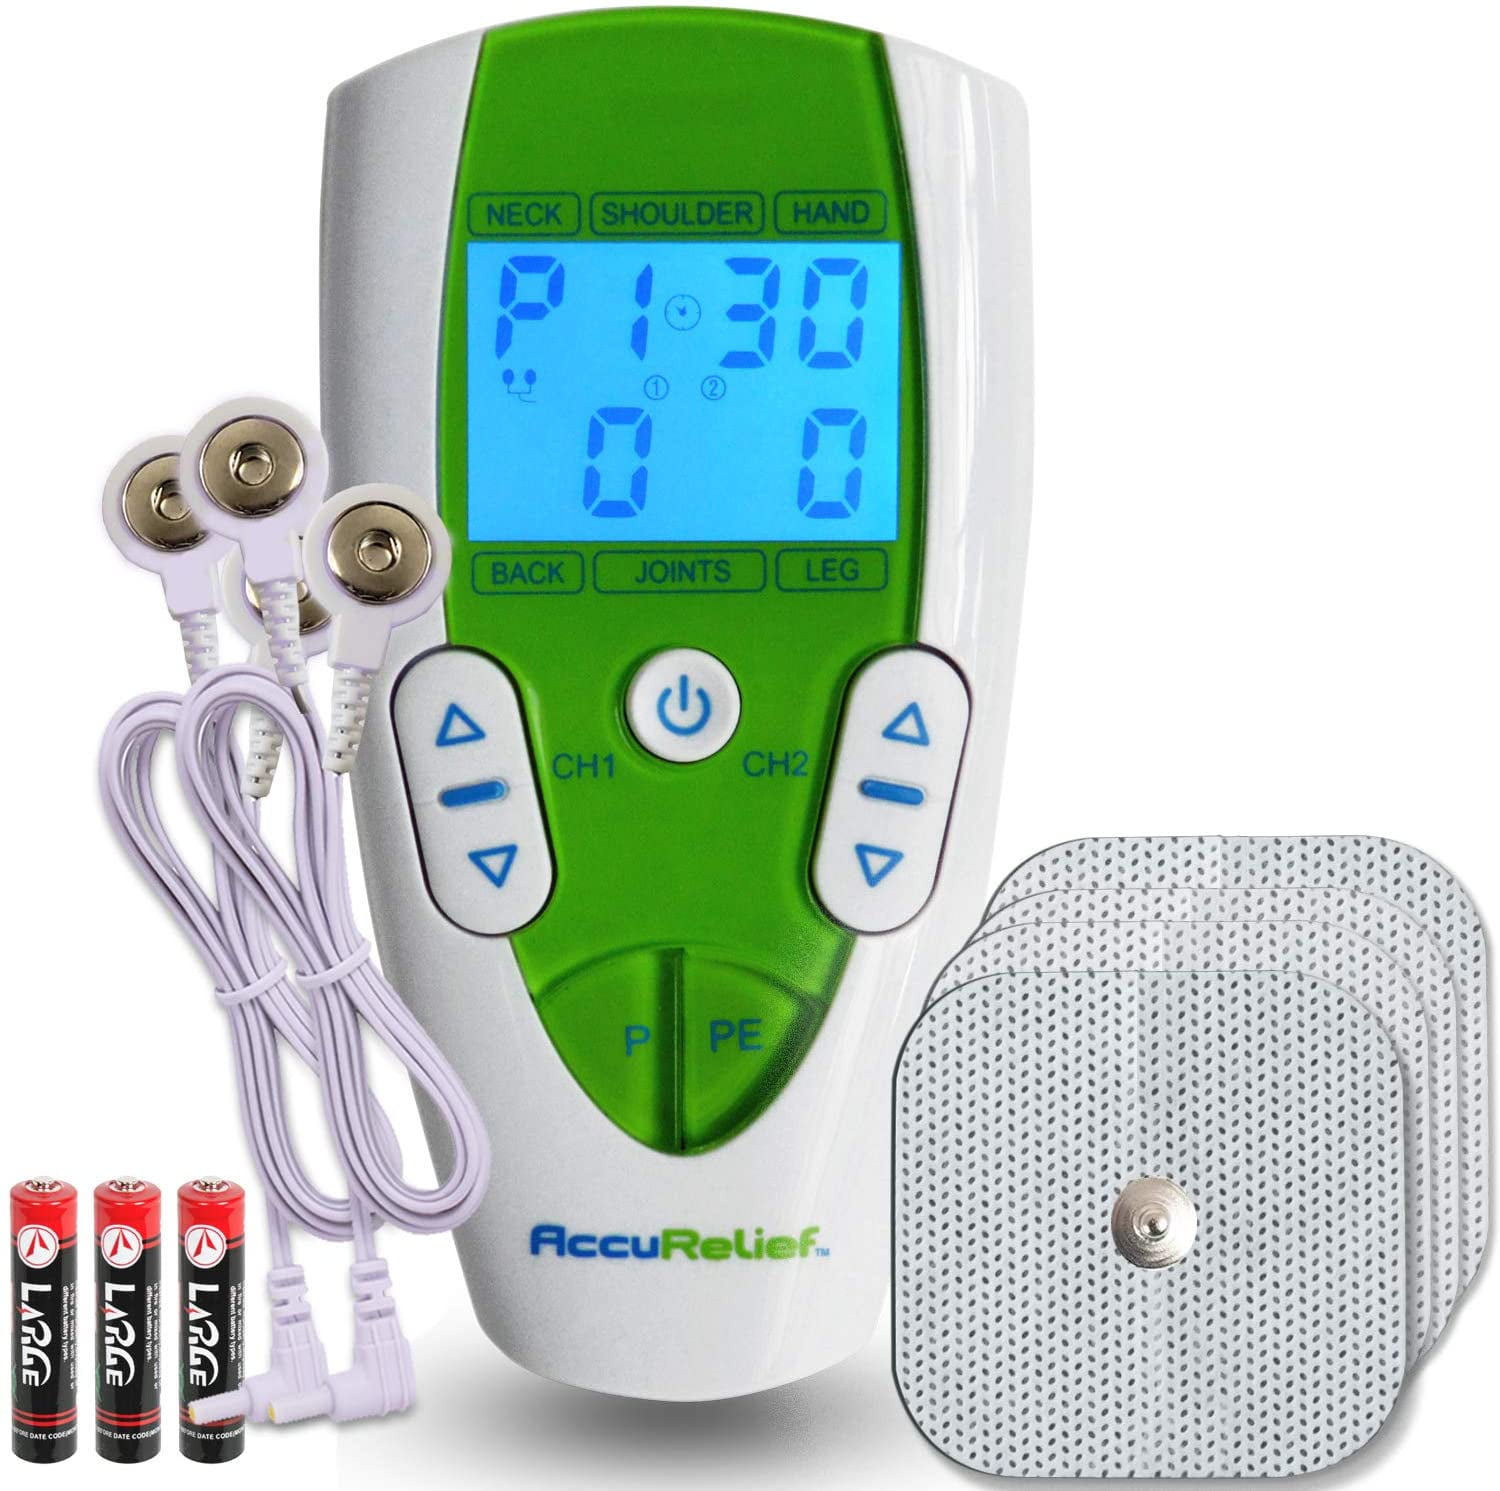 AccuRelief Single Channel Tens Electrotherapy Pain Relief System